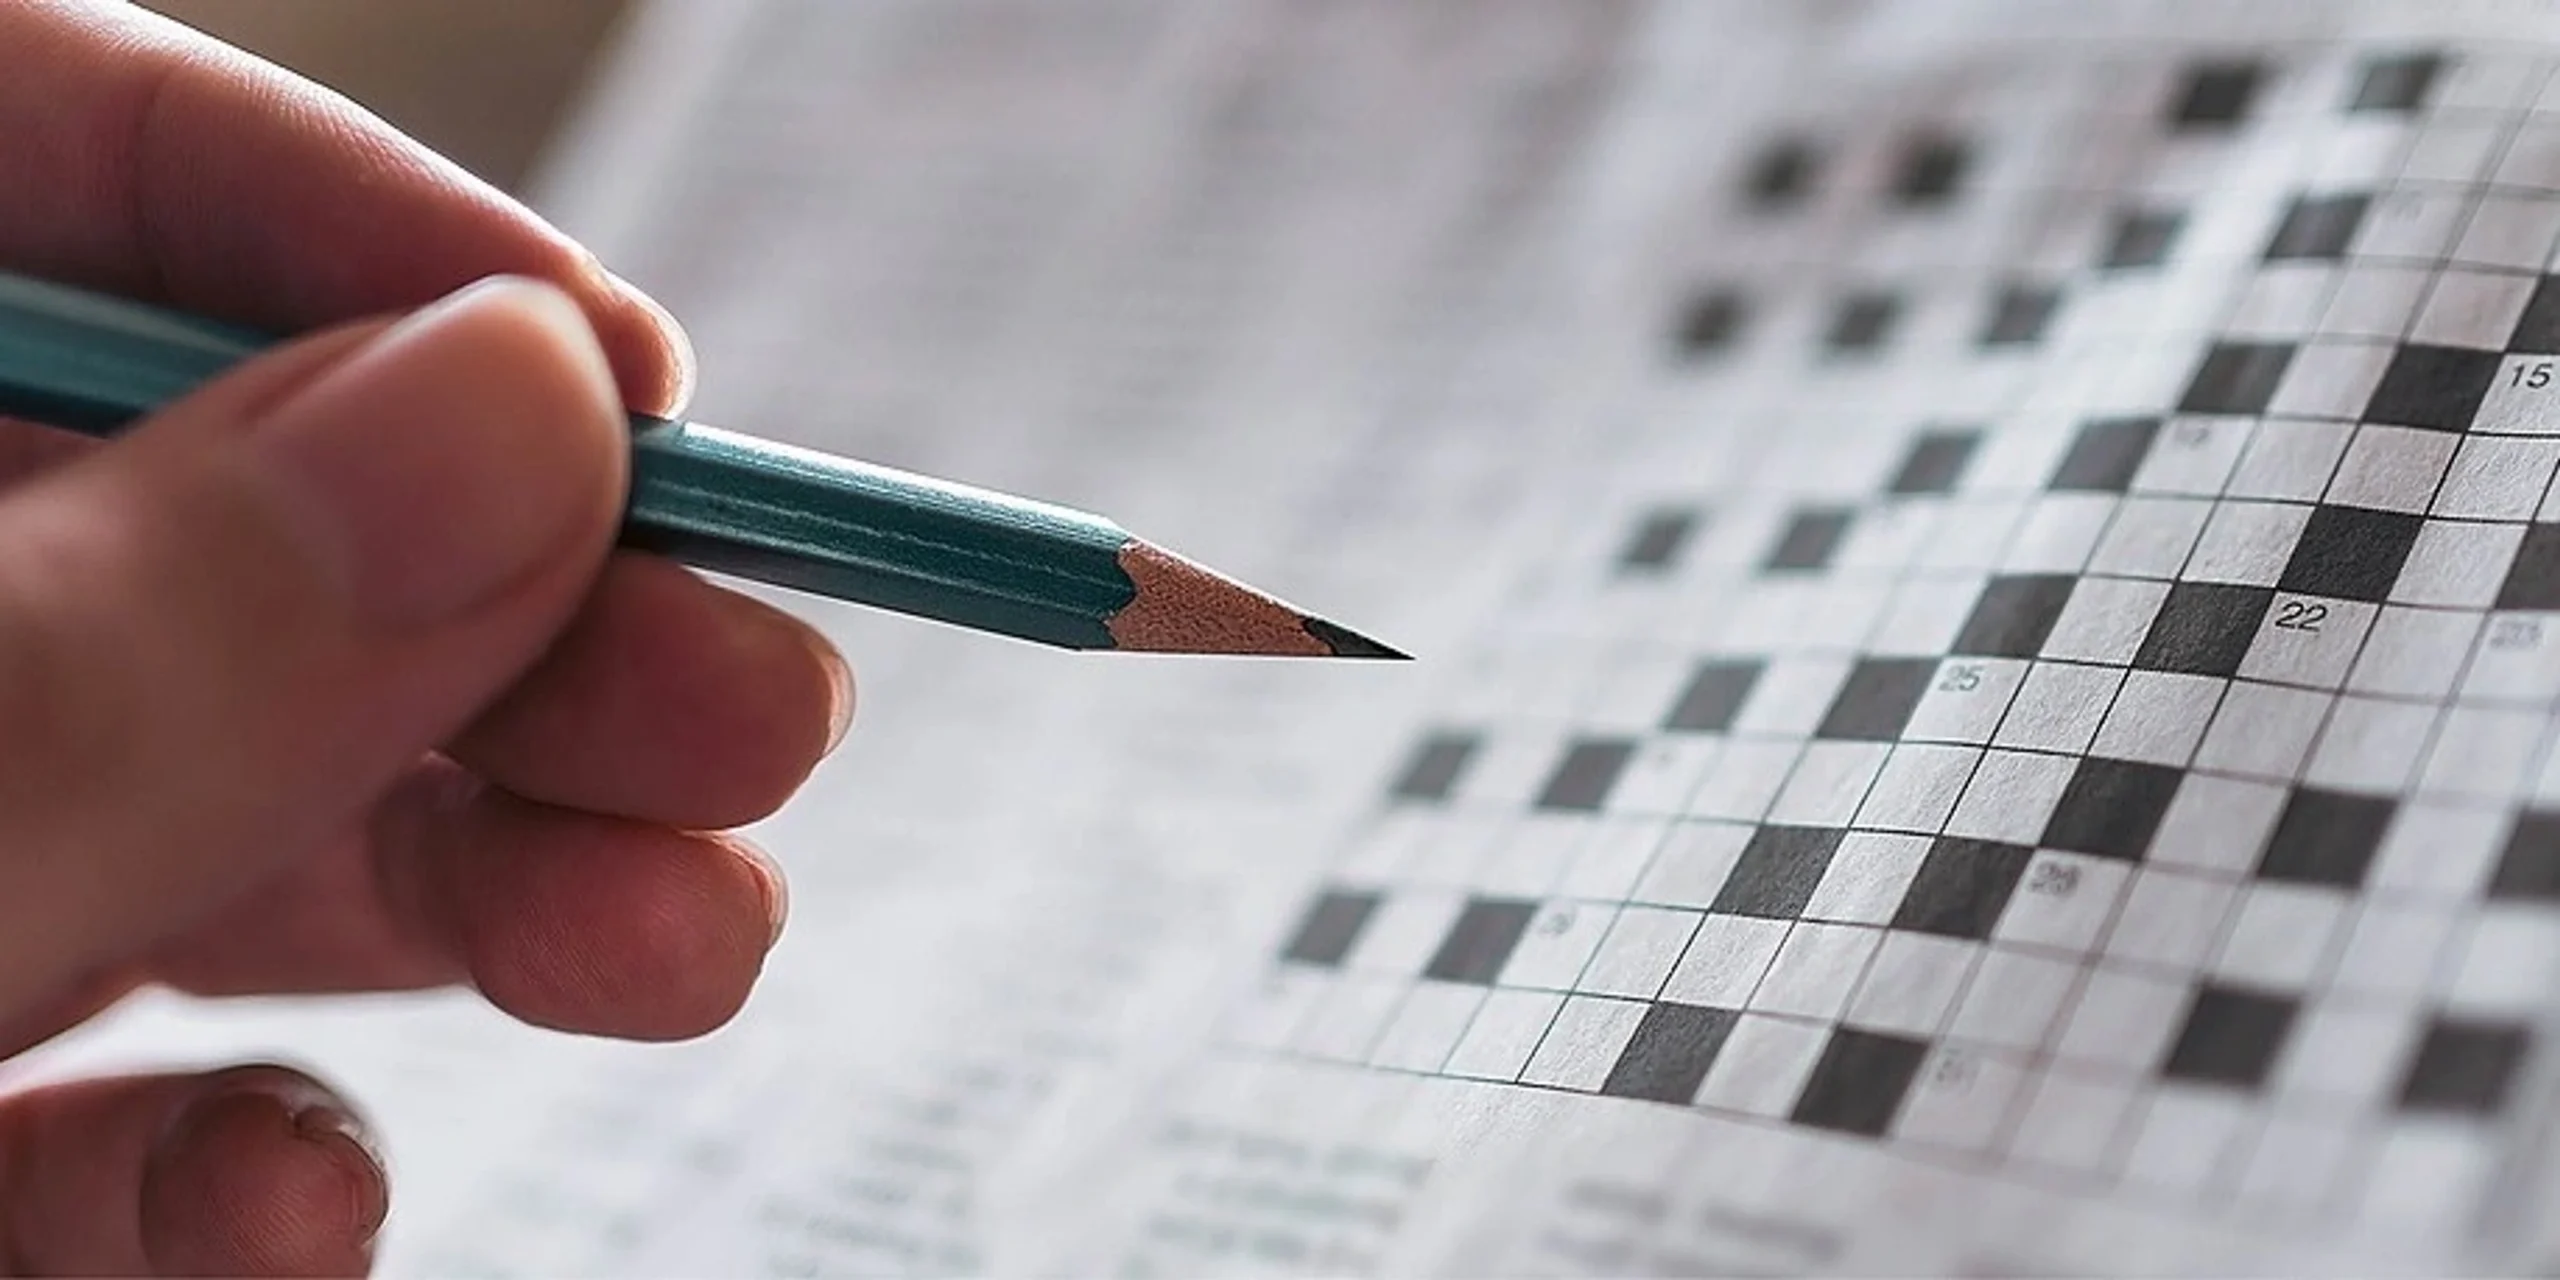 Learn how to conquer the cryptic crossword